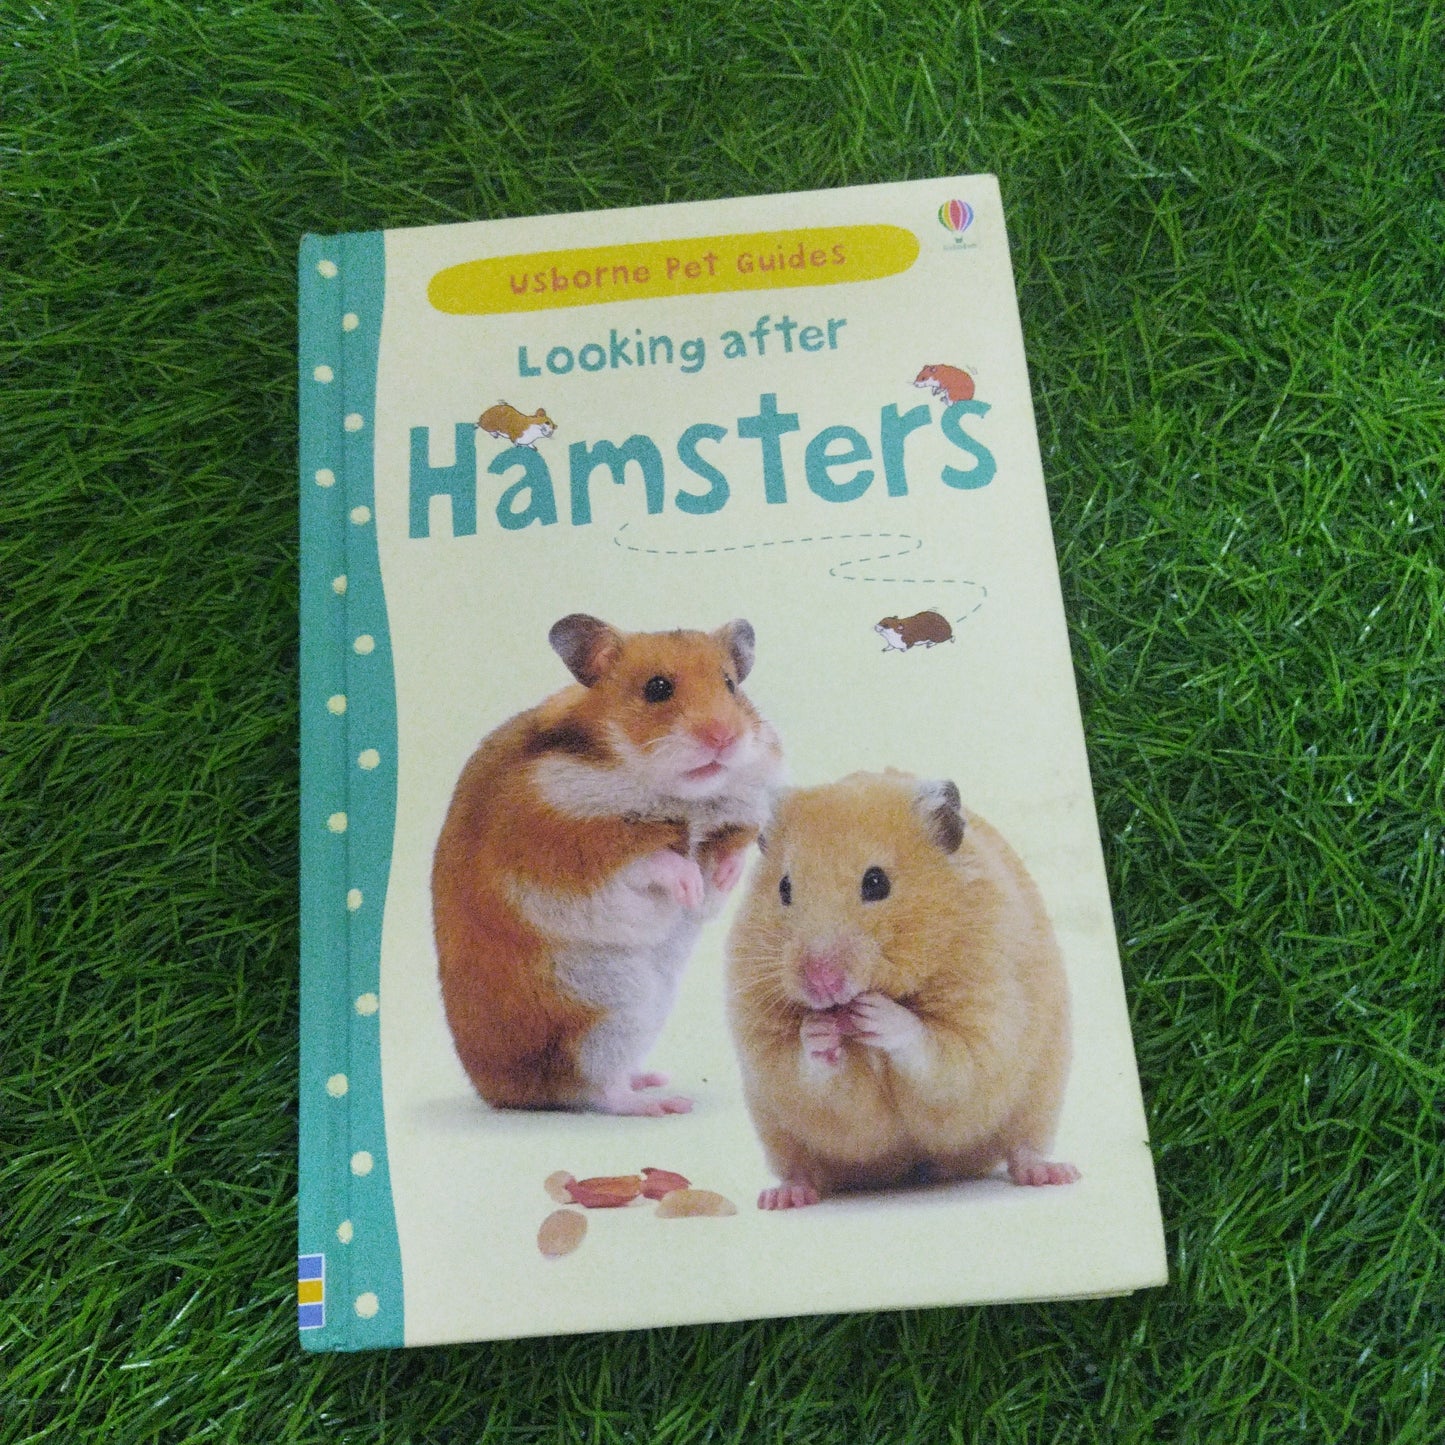 Usborne pet guides looking after Hamsters